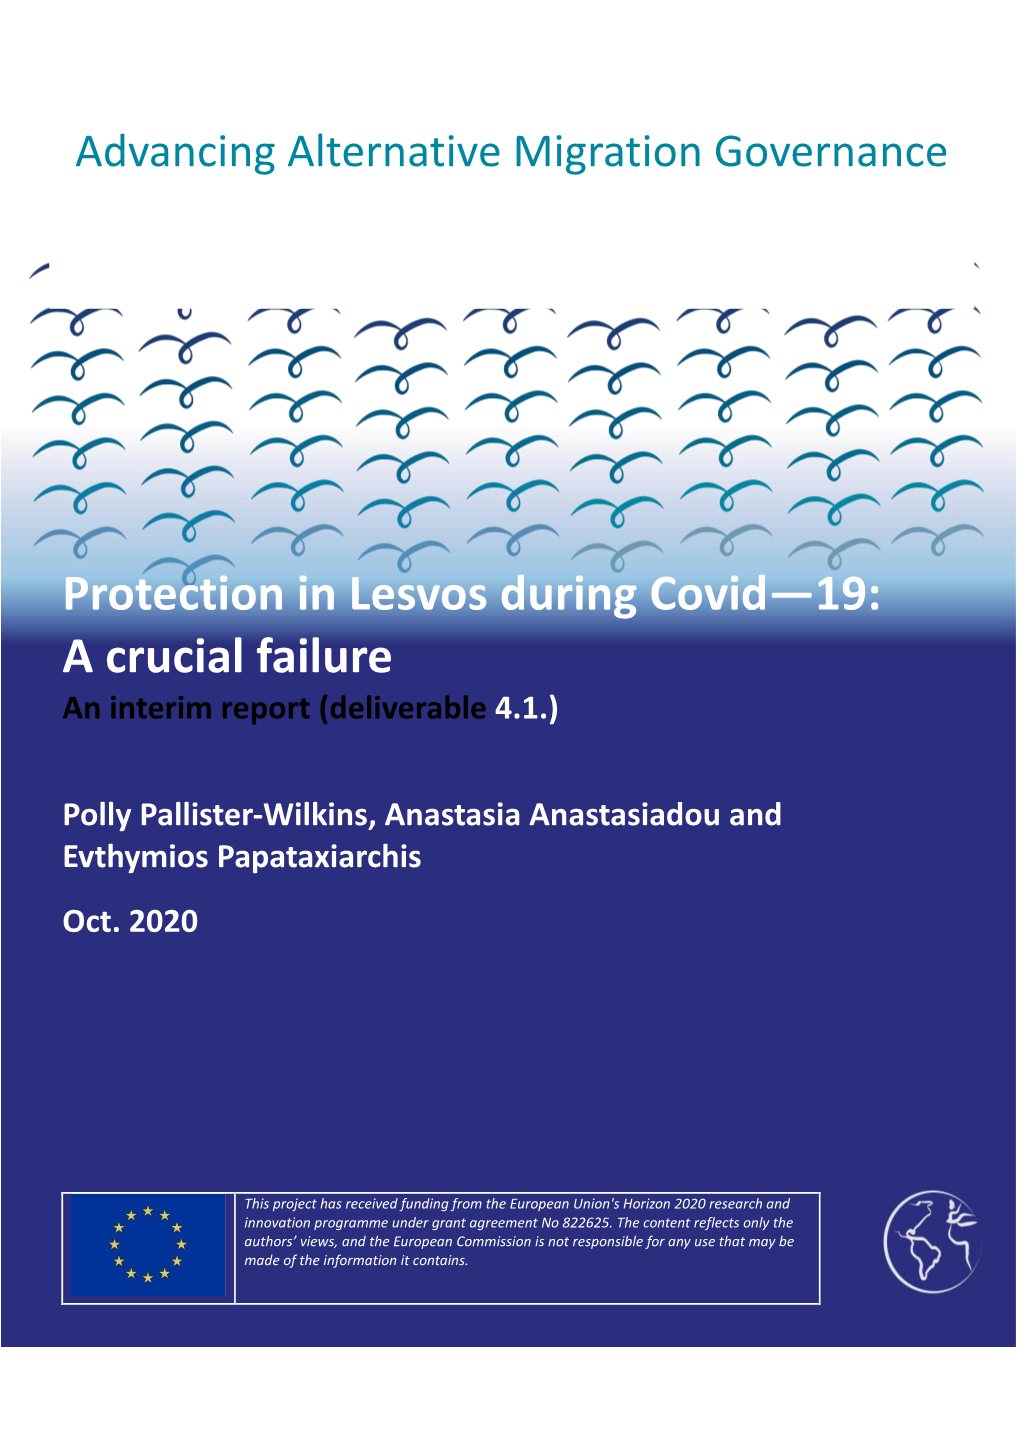 Protection in Lesvos During Covid—19: a Crucial Failure an Interim Report (Deliverable 4.1.)